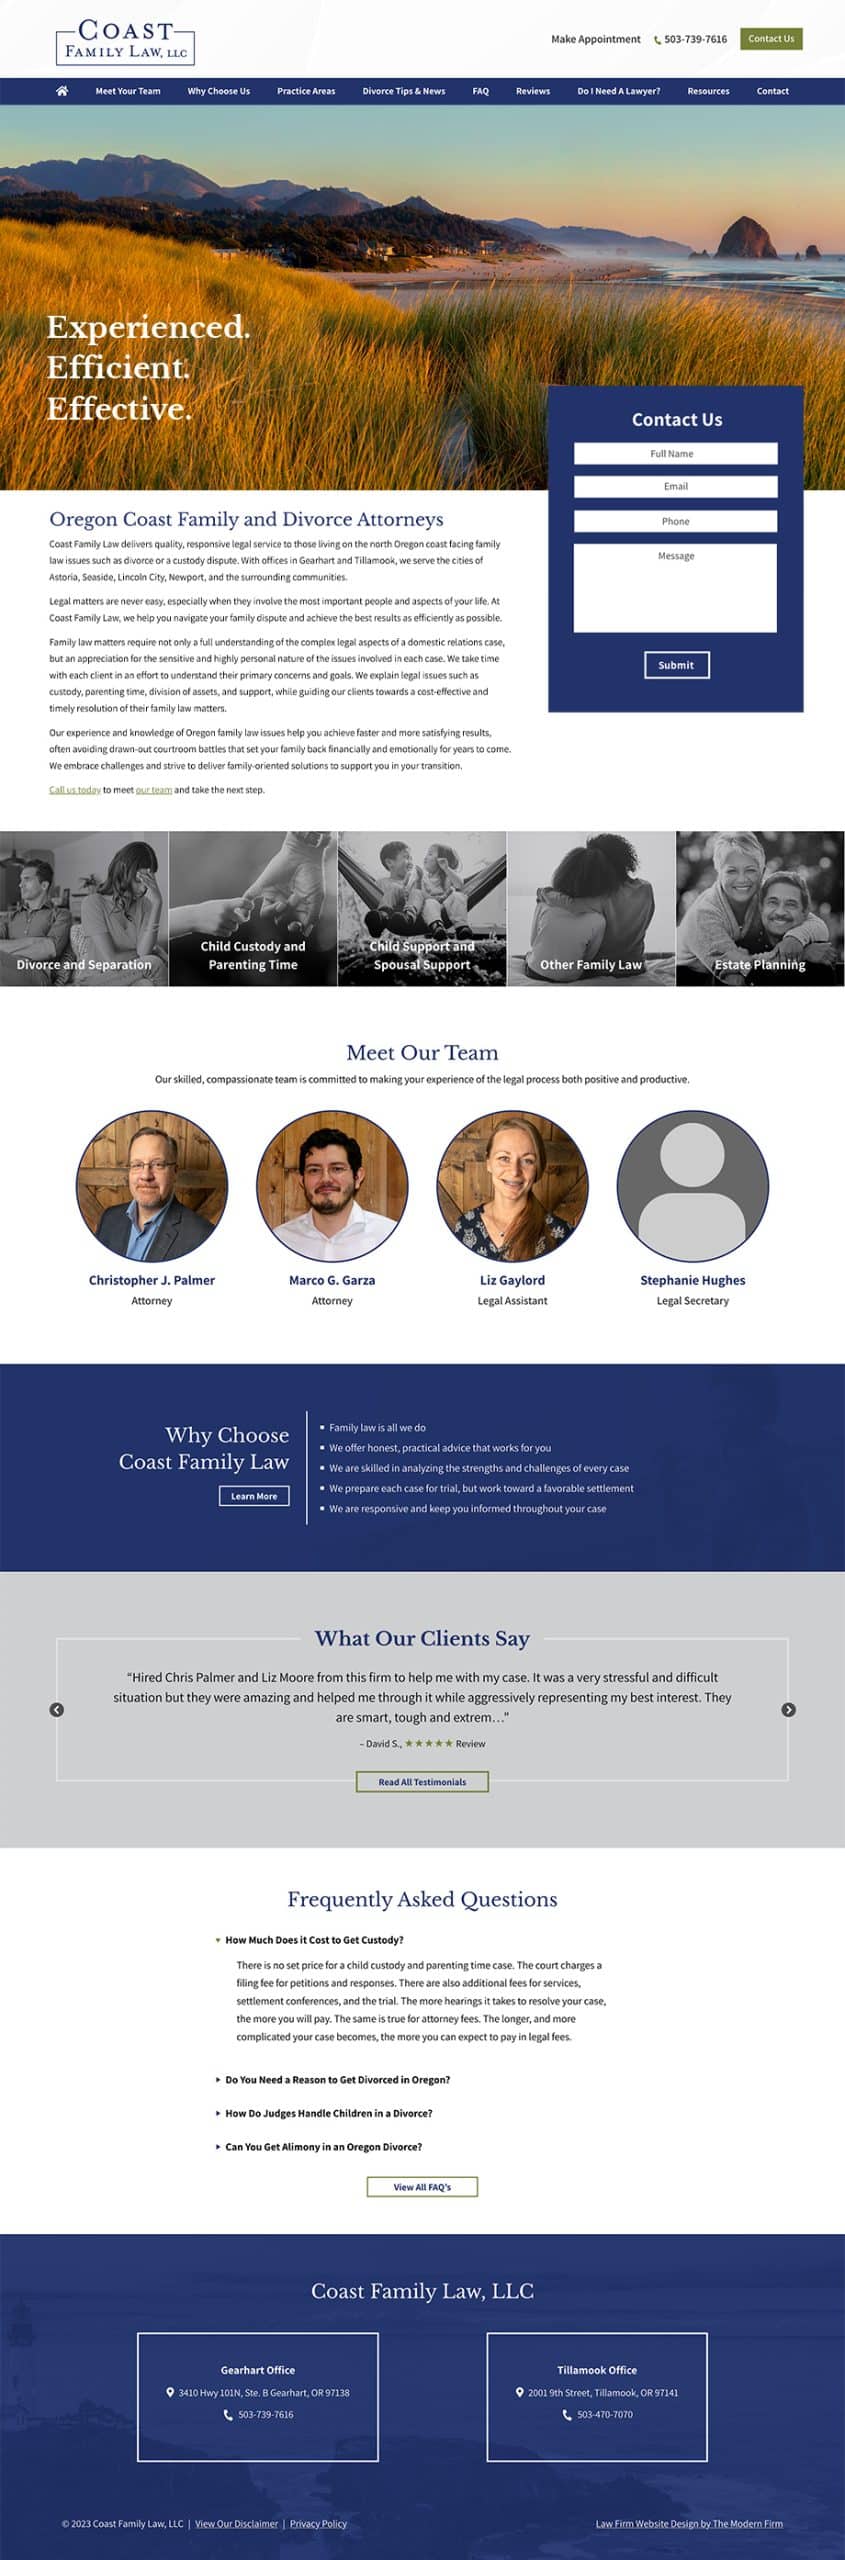 Law Firm Website Design for Coast Family Law, LLC